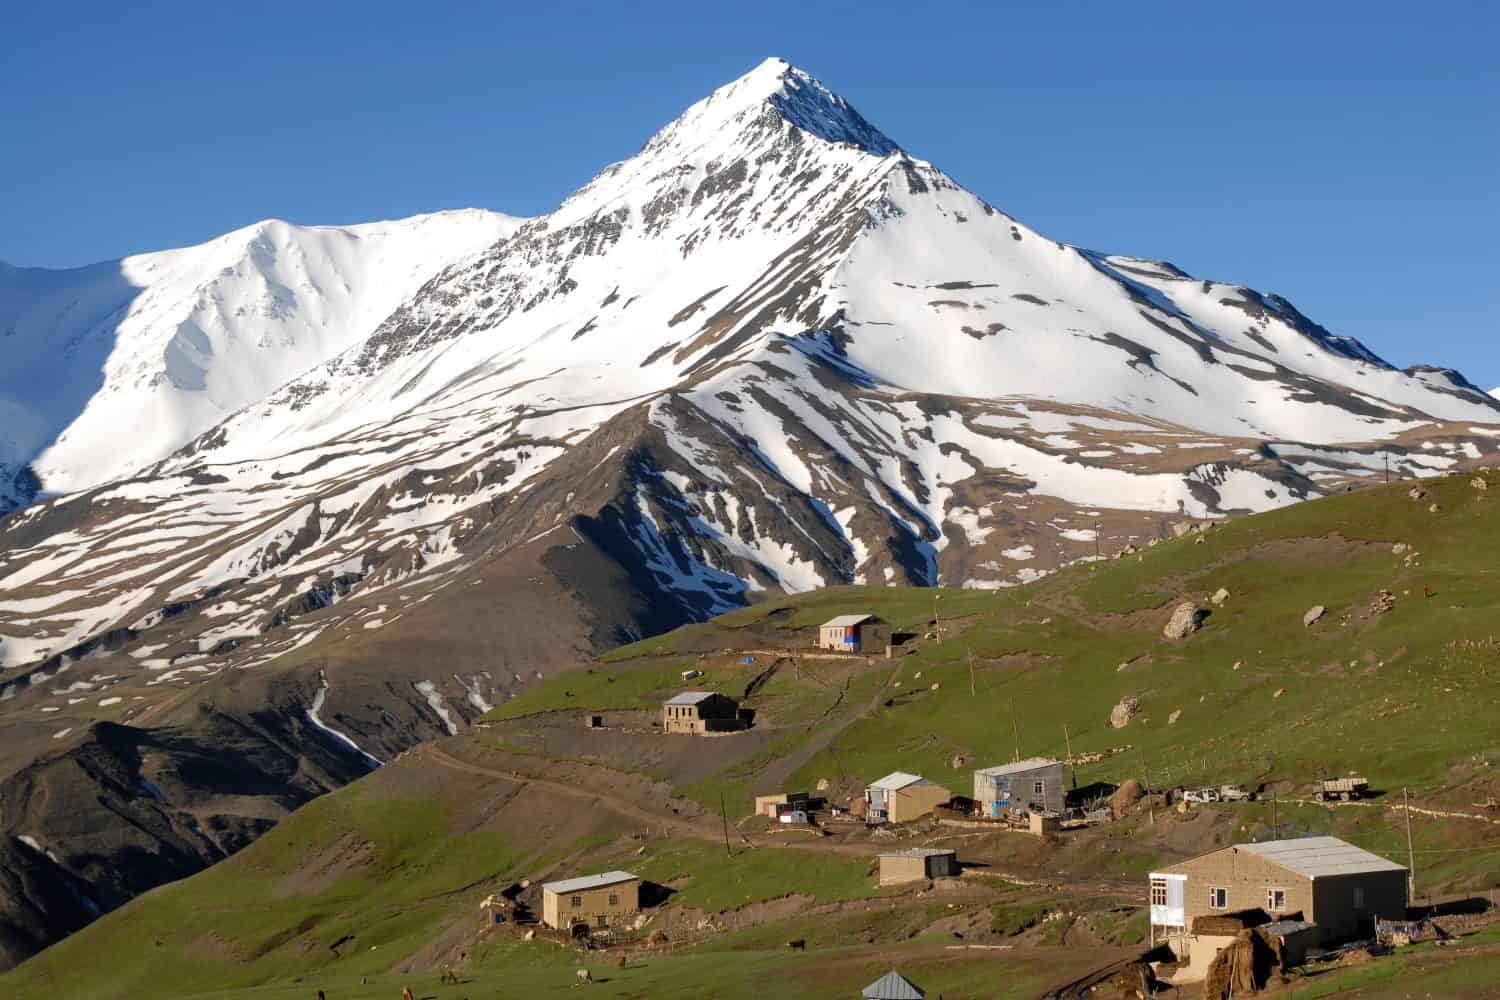 Kurush village (the southernmost point of Russia and the highest mountain settlement in Europe, 2560 m) and Mount Bazarduzu (4,467 m, the highest peak in Azerbaijan). Dagestan, North Caucasus, Russia.